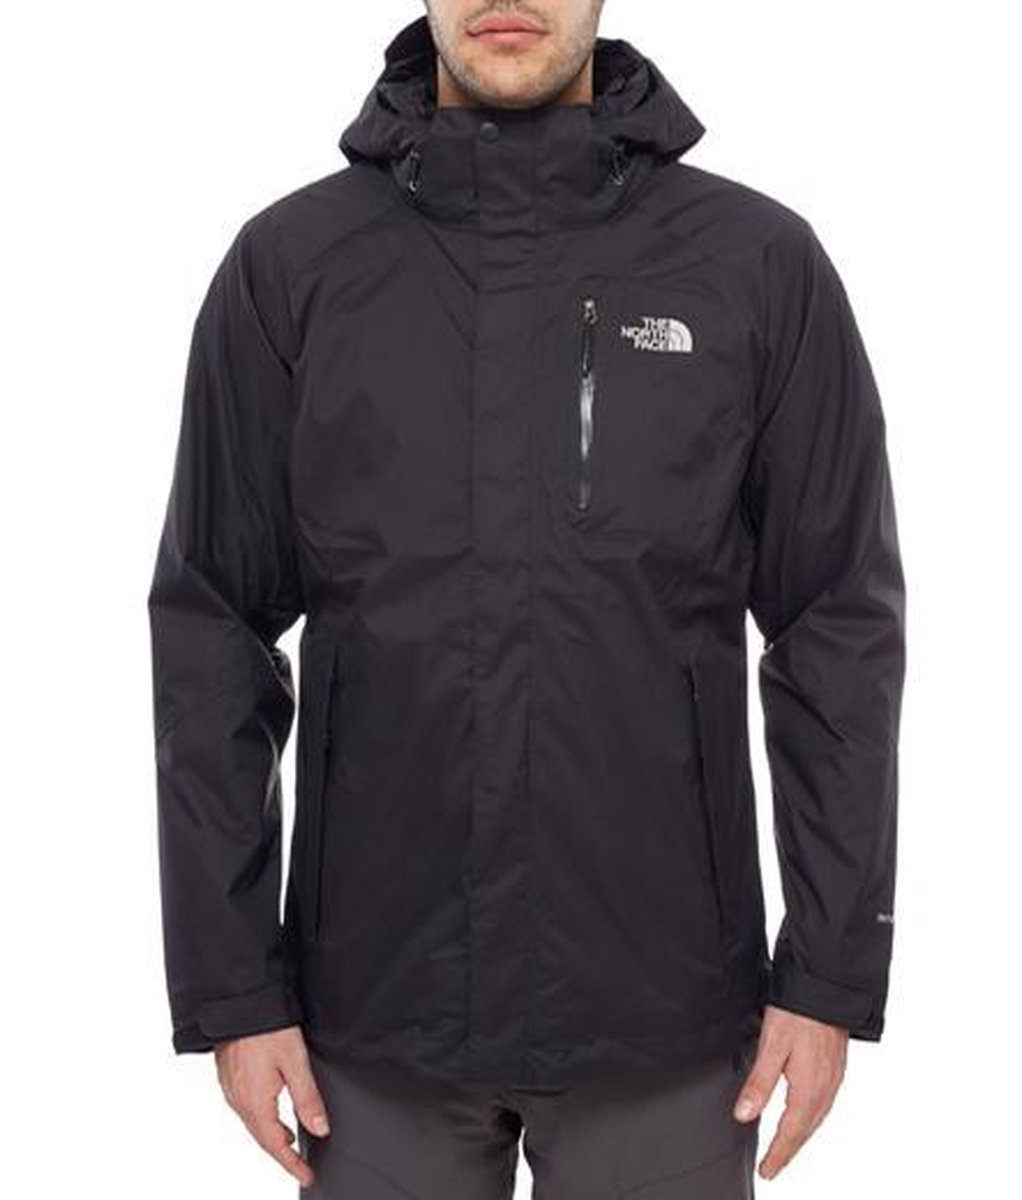 THE NORTH FACE ZENITH TRICLIMATE JACKET - TNF BLACK | bol.com